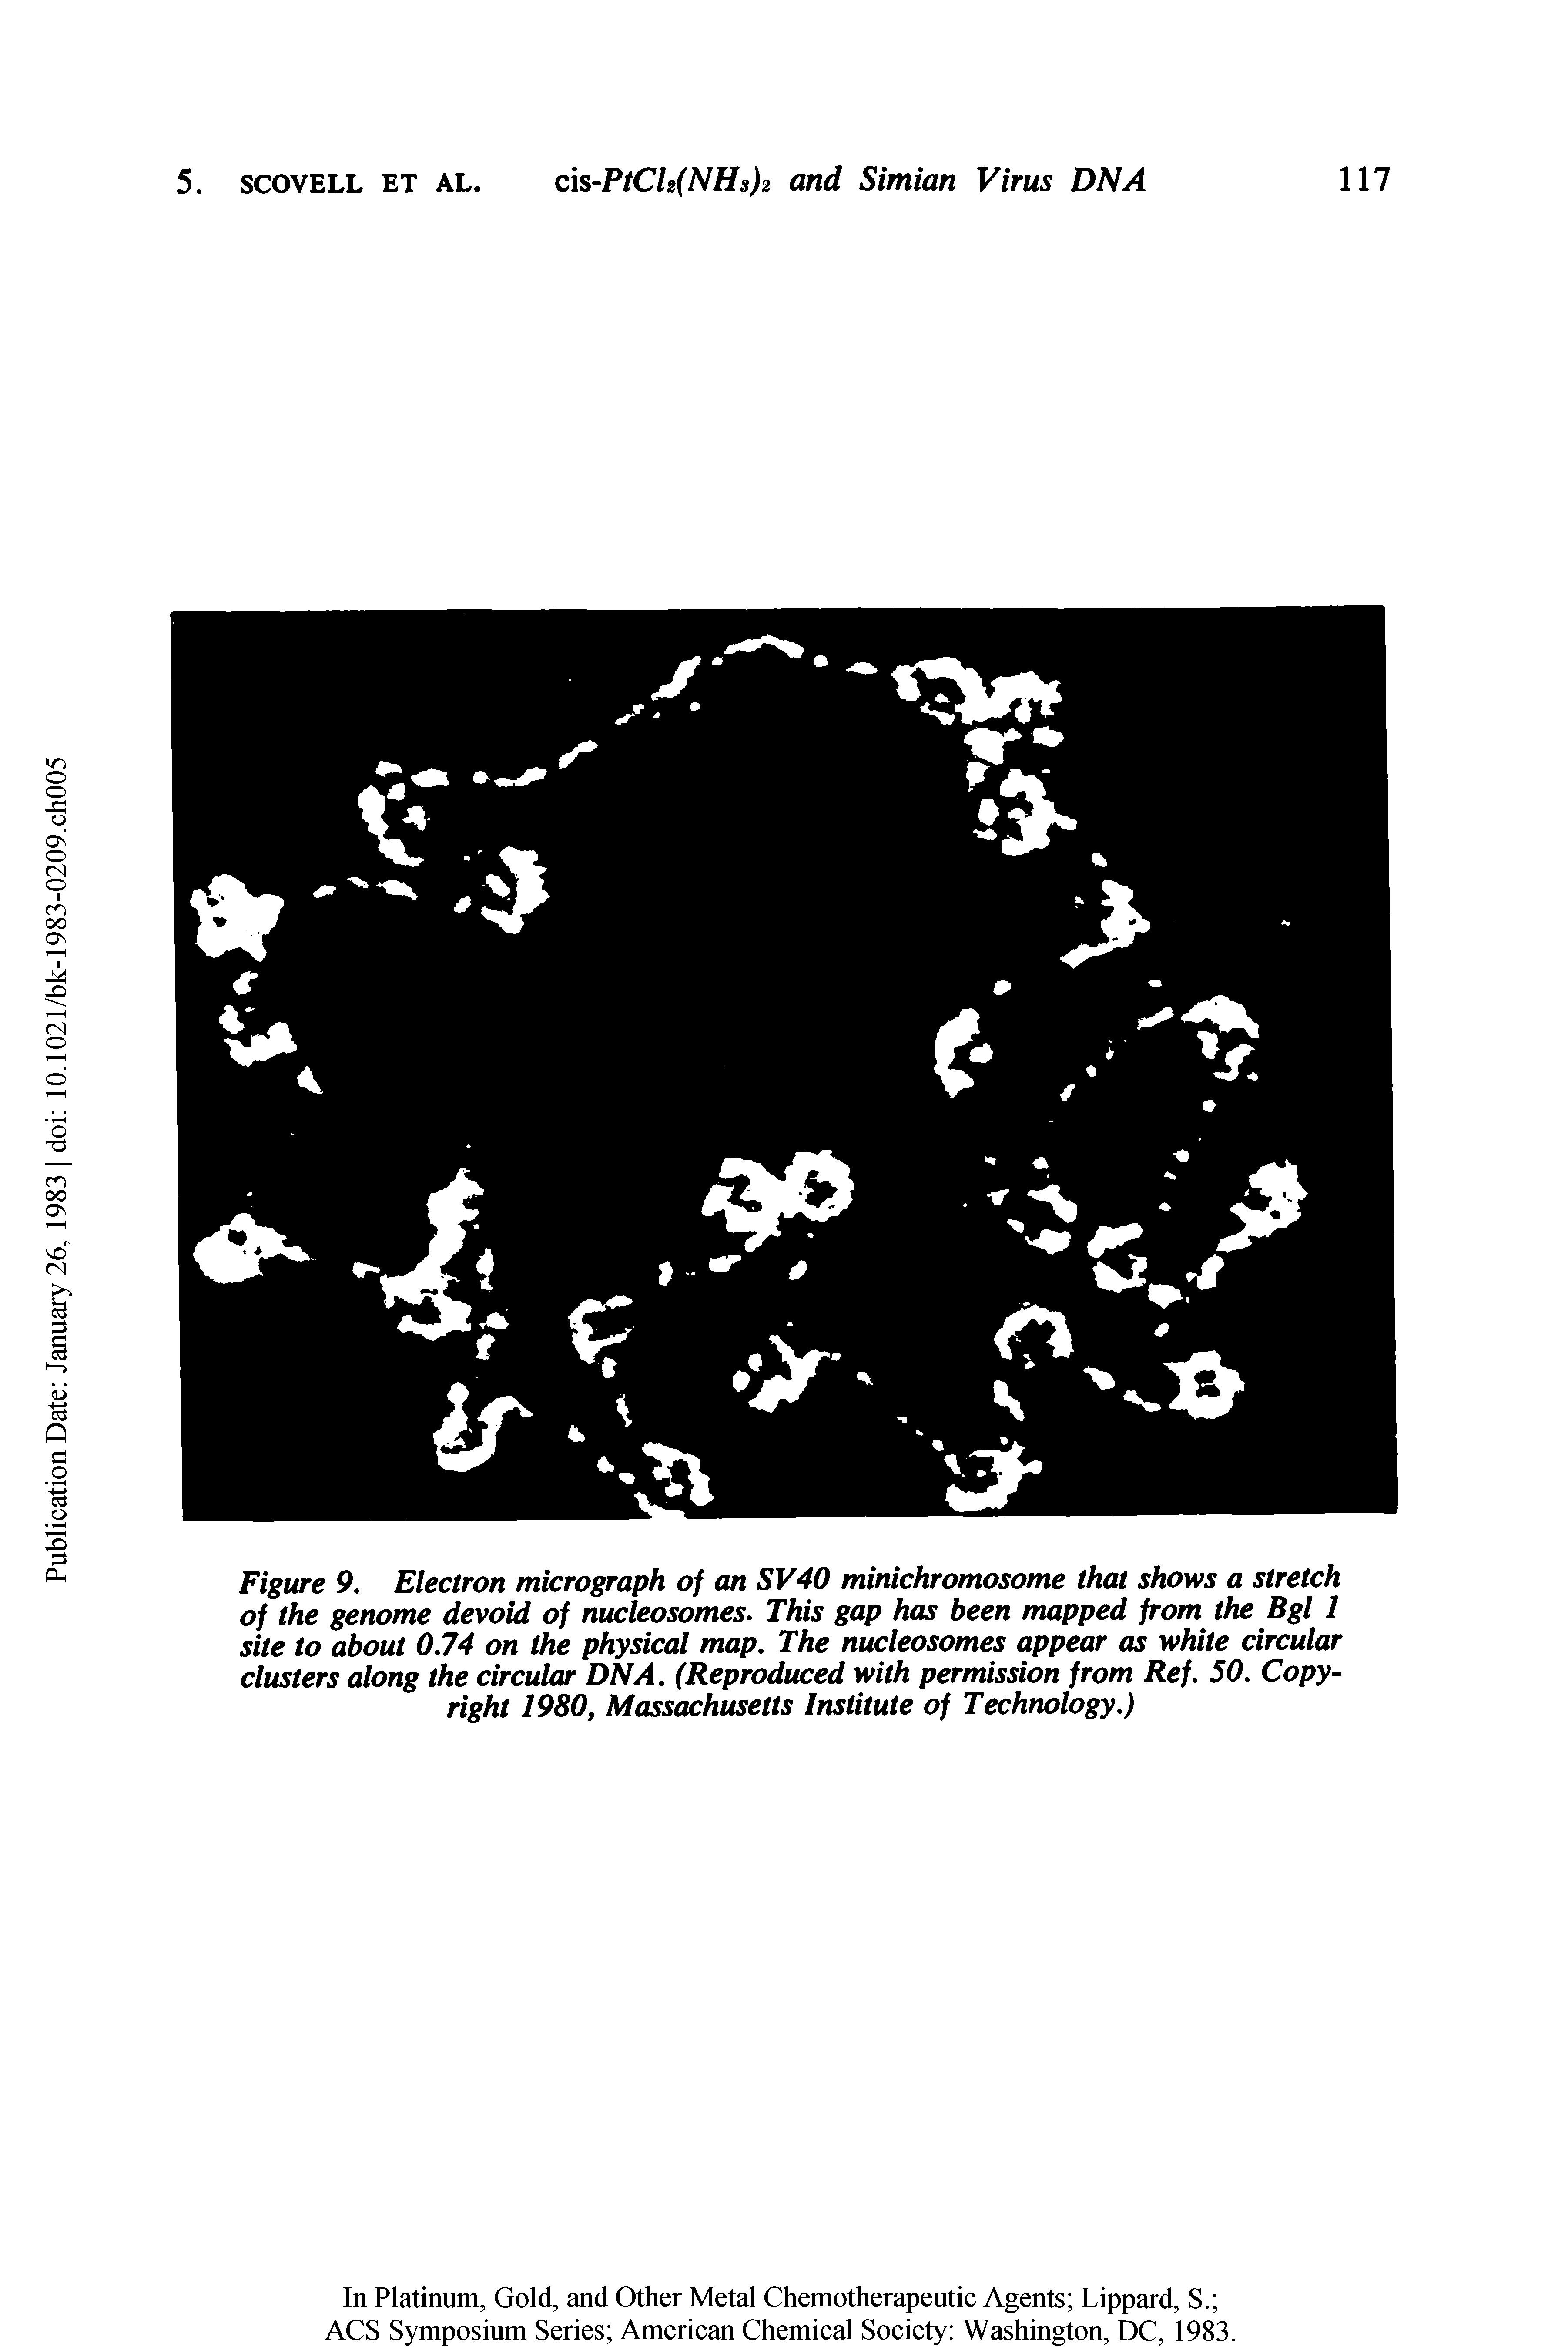 Figure 9. Electron micrograph of an SV40 minichromosome that shows a stretch of the genome devoid of nucleosomes. This gap has been mapped from the Bgl 1 site to about 0.74 on the physical map. The nucleosomes appear as white circular clusters along the circular DNA. (Reproduced with permission from Ref. 50. Copyright 1980, Massachusetts Institute of Technology.)...